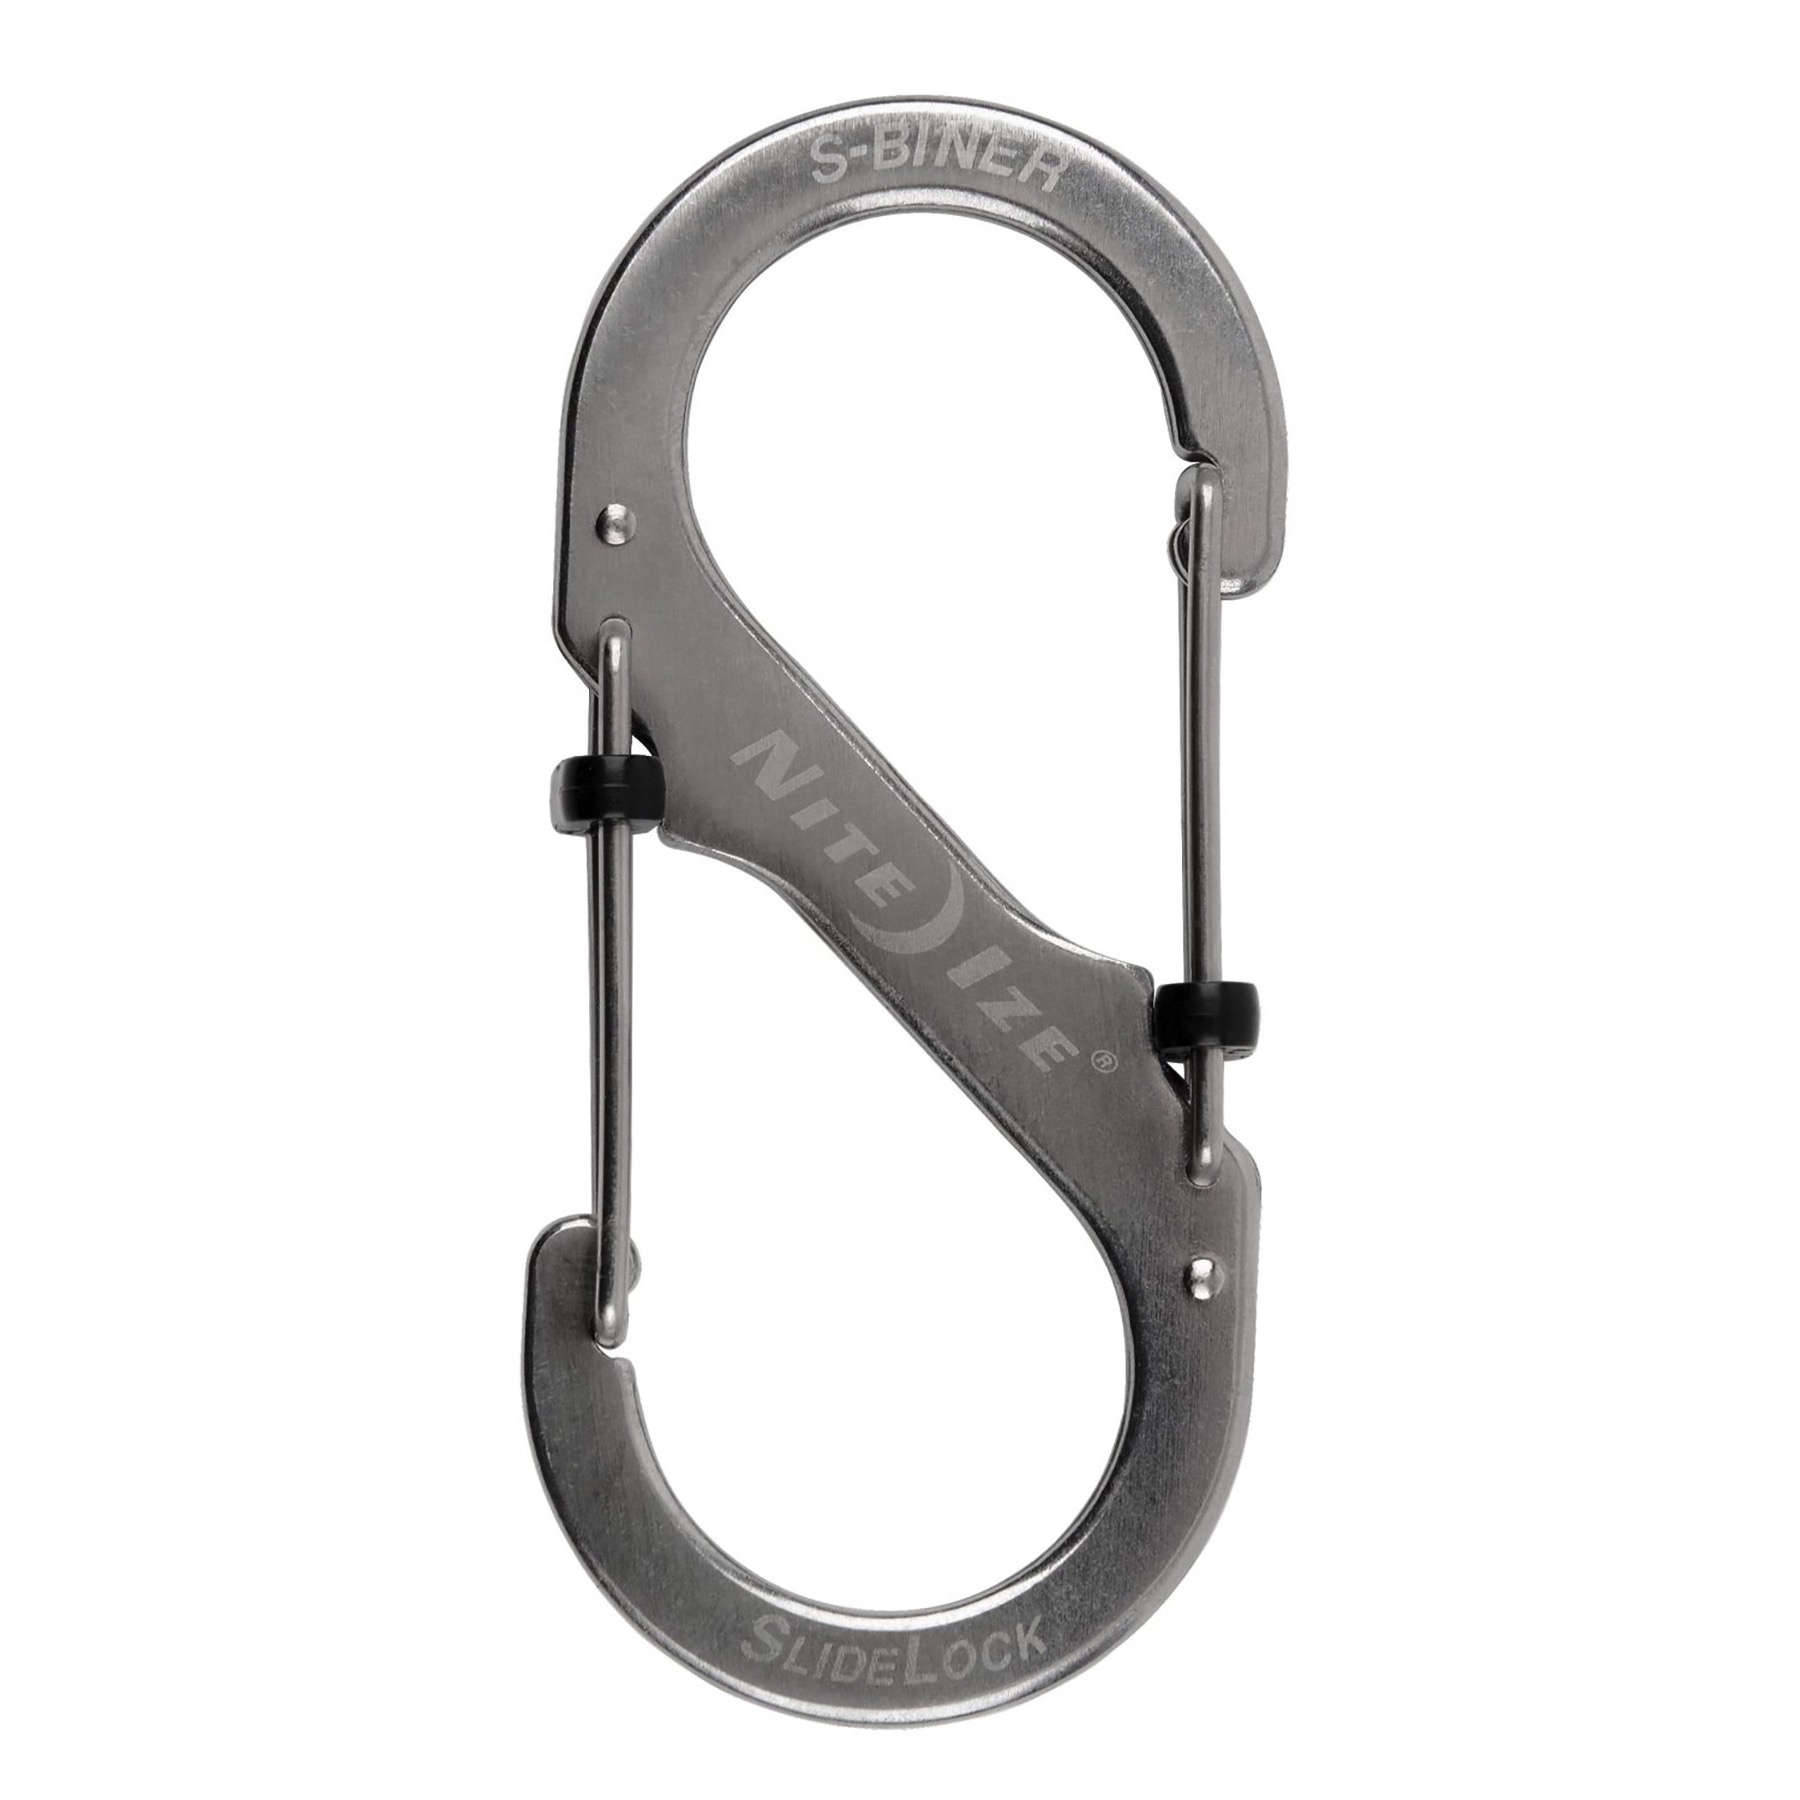 Carabiner 2/" Nite Ize S-Biner SILVER Stainless Steel Size #2